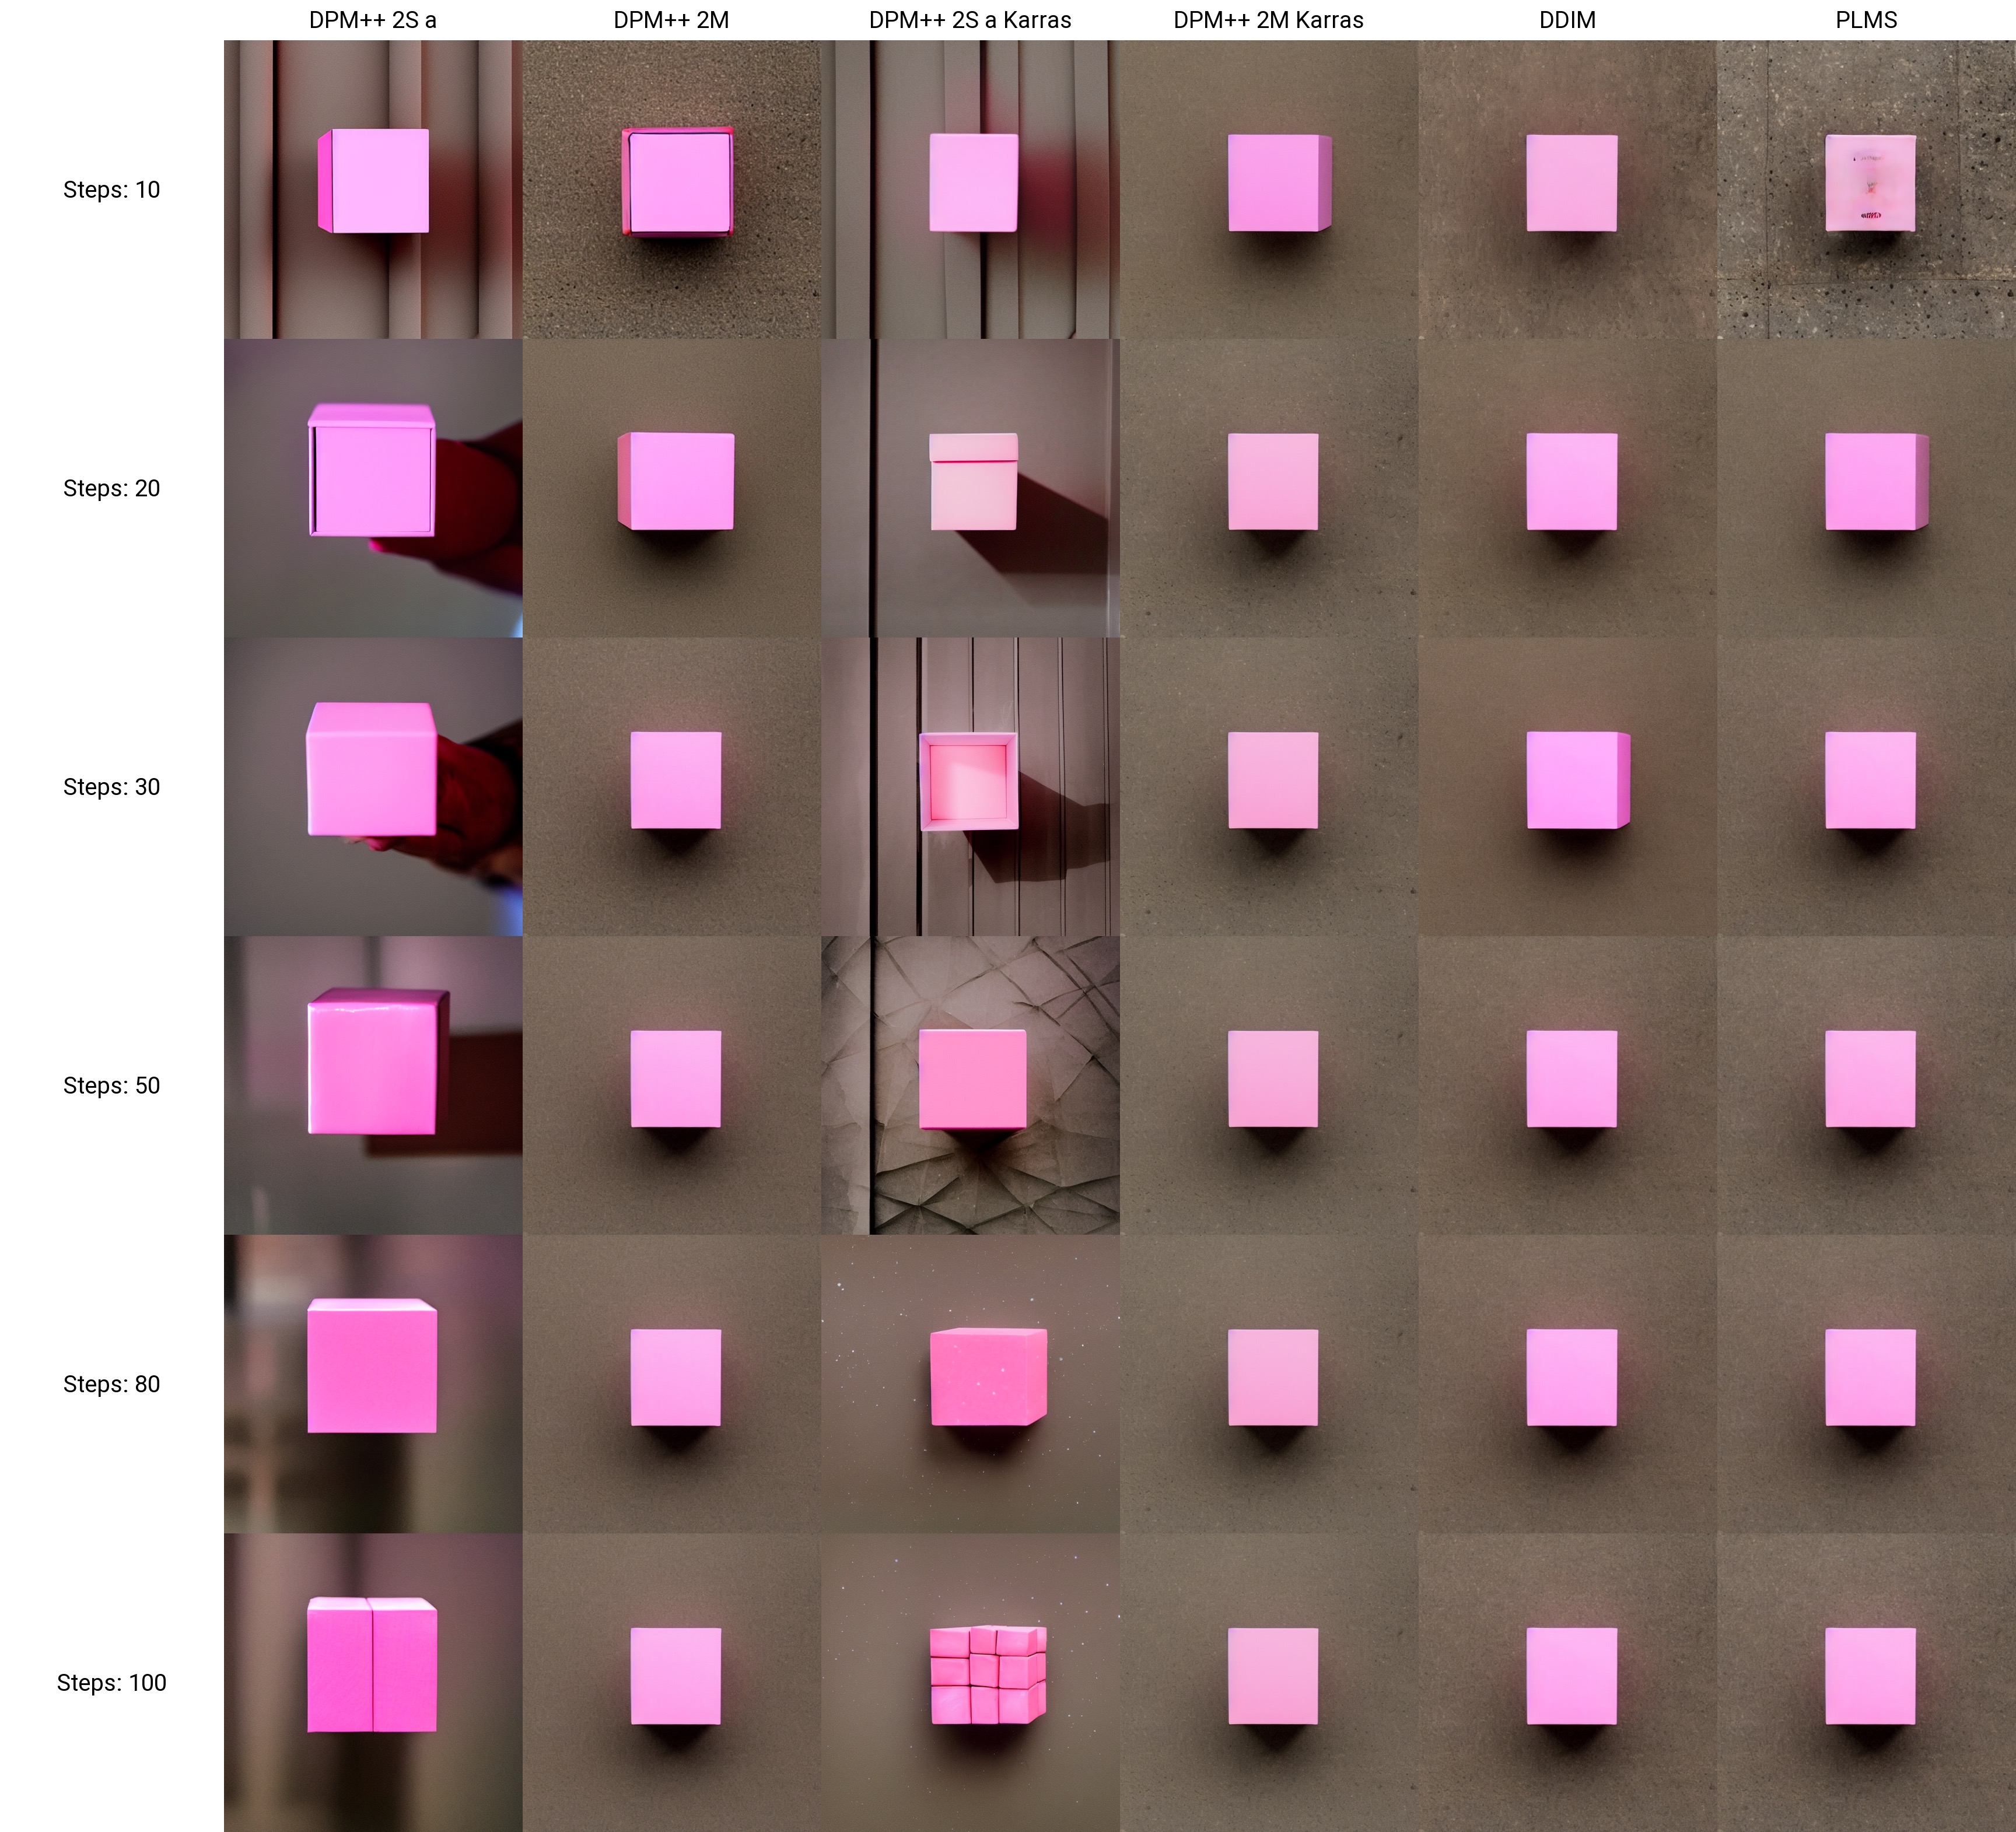 Image grid showing different results of image generation 